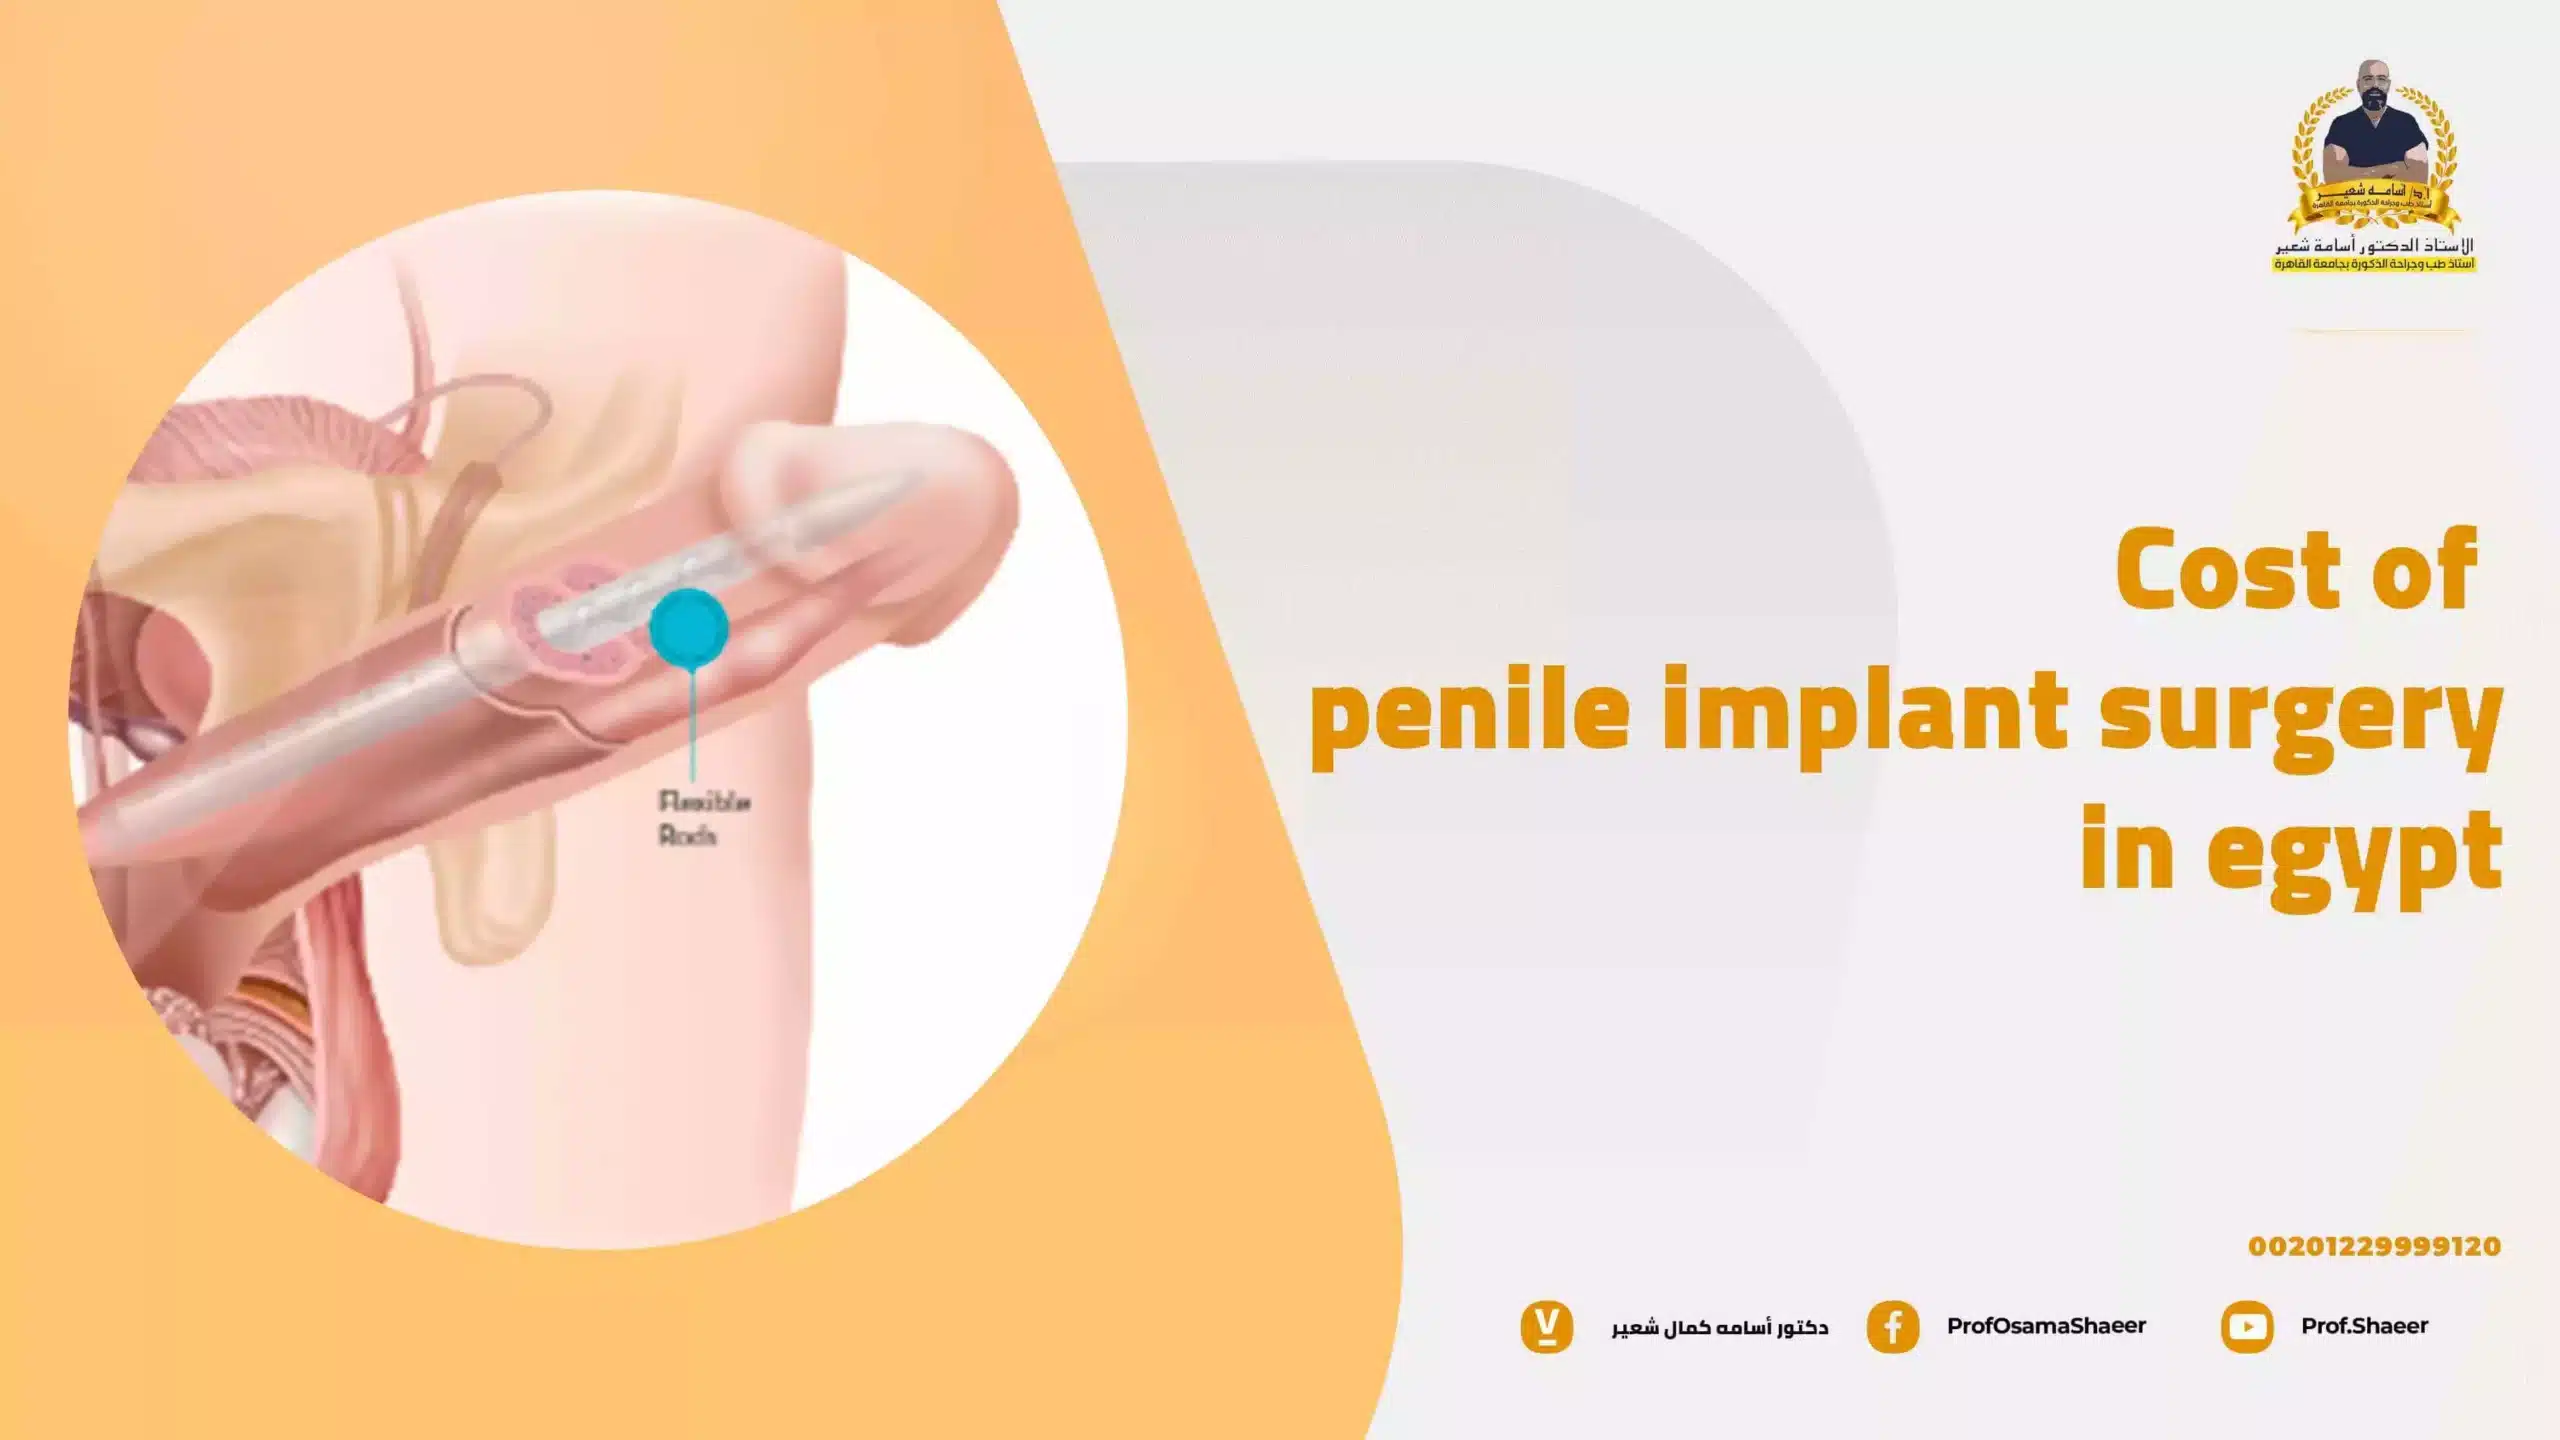 Cost of Penile Implant Surgery in Egypt